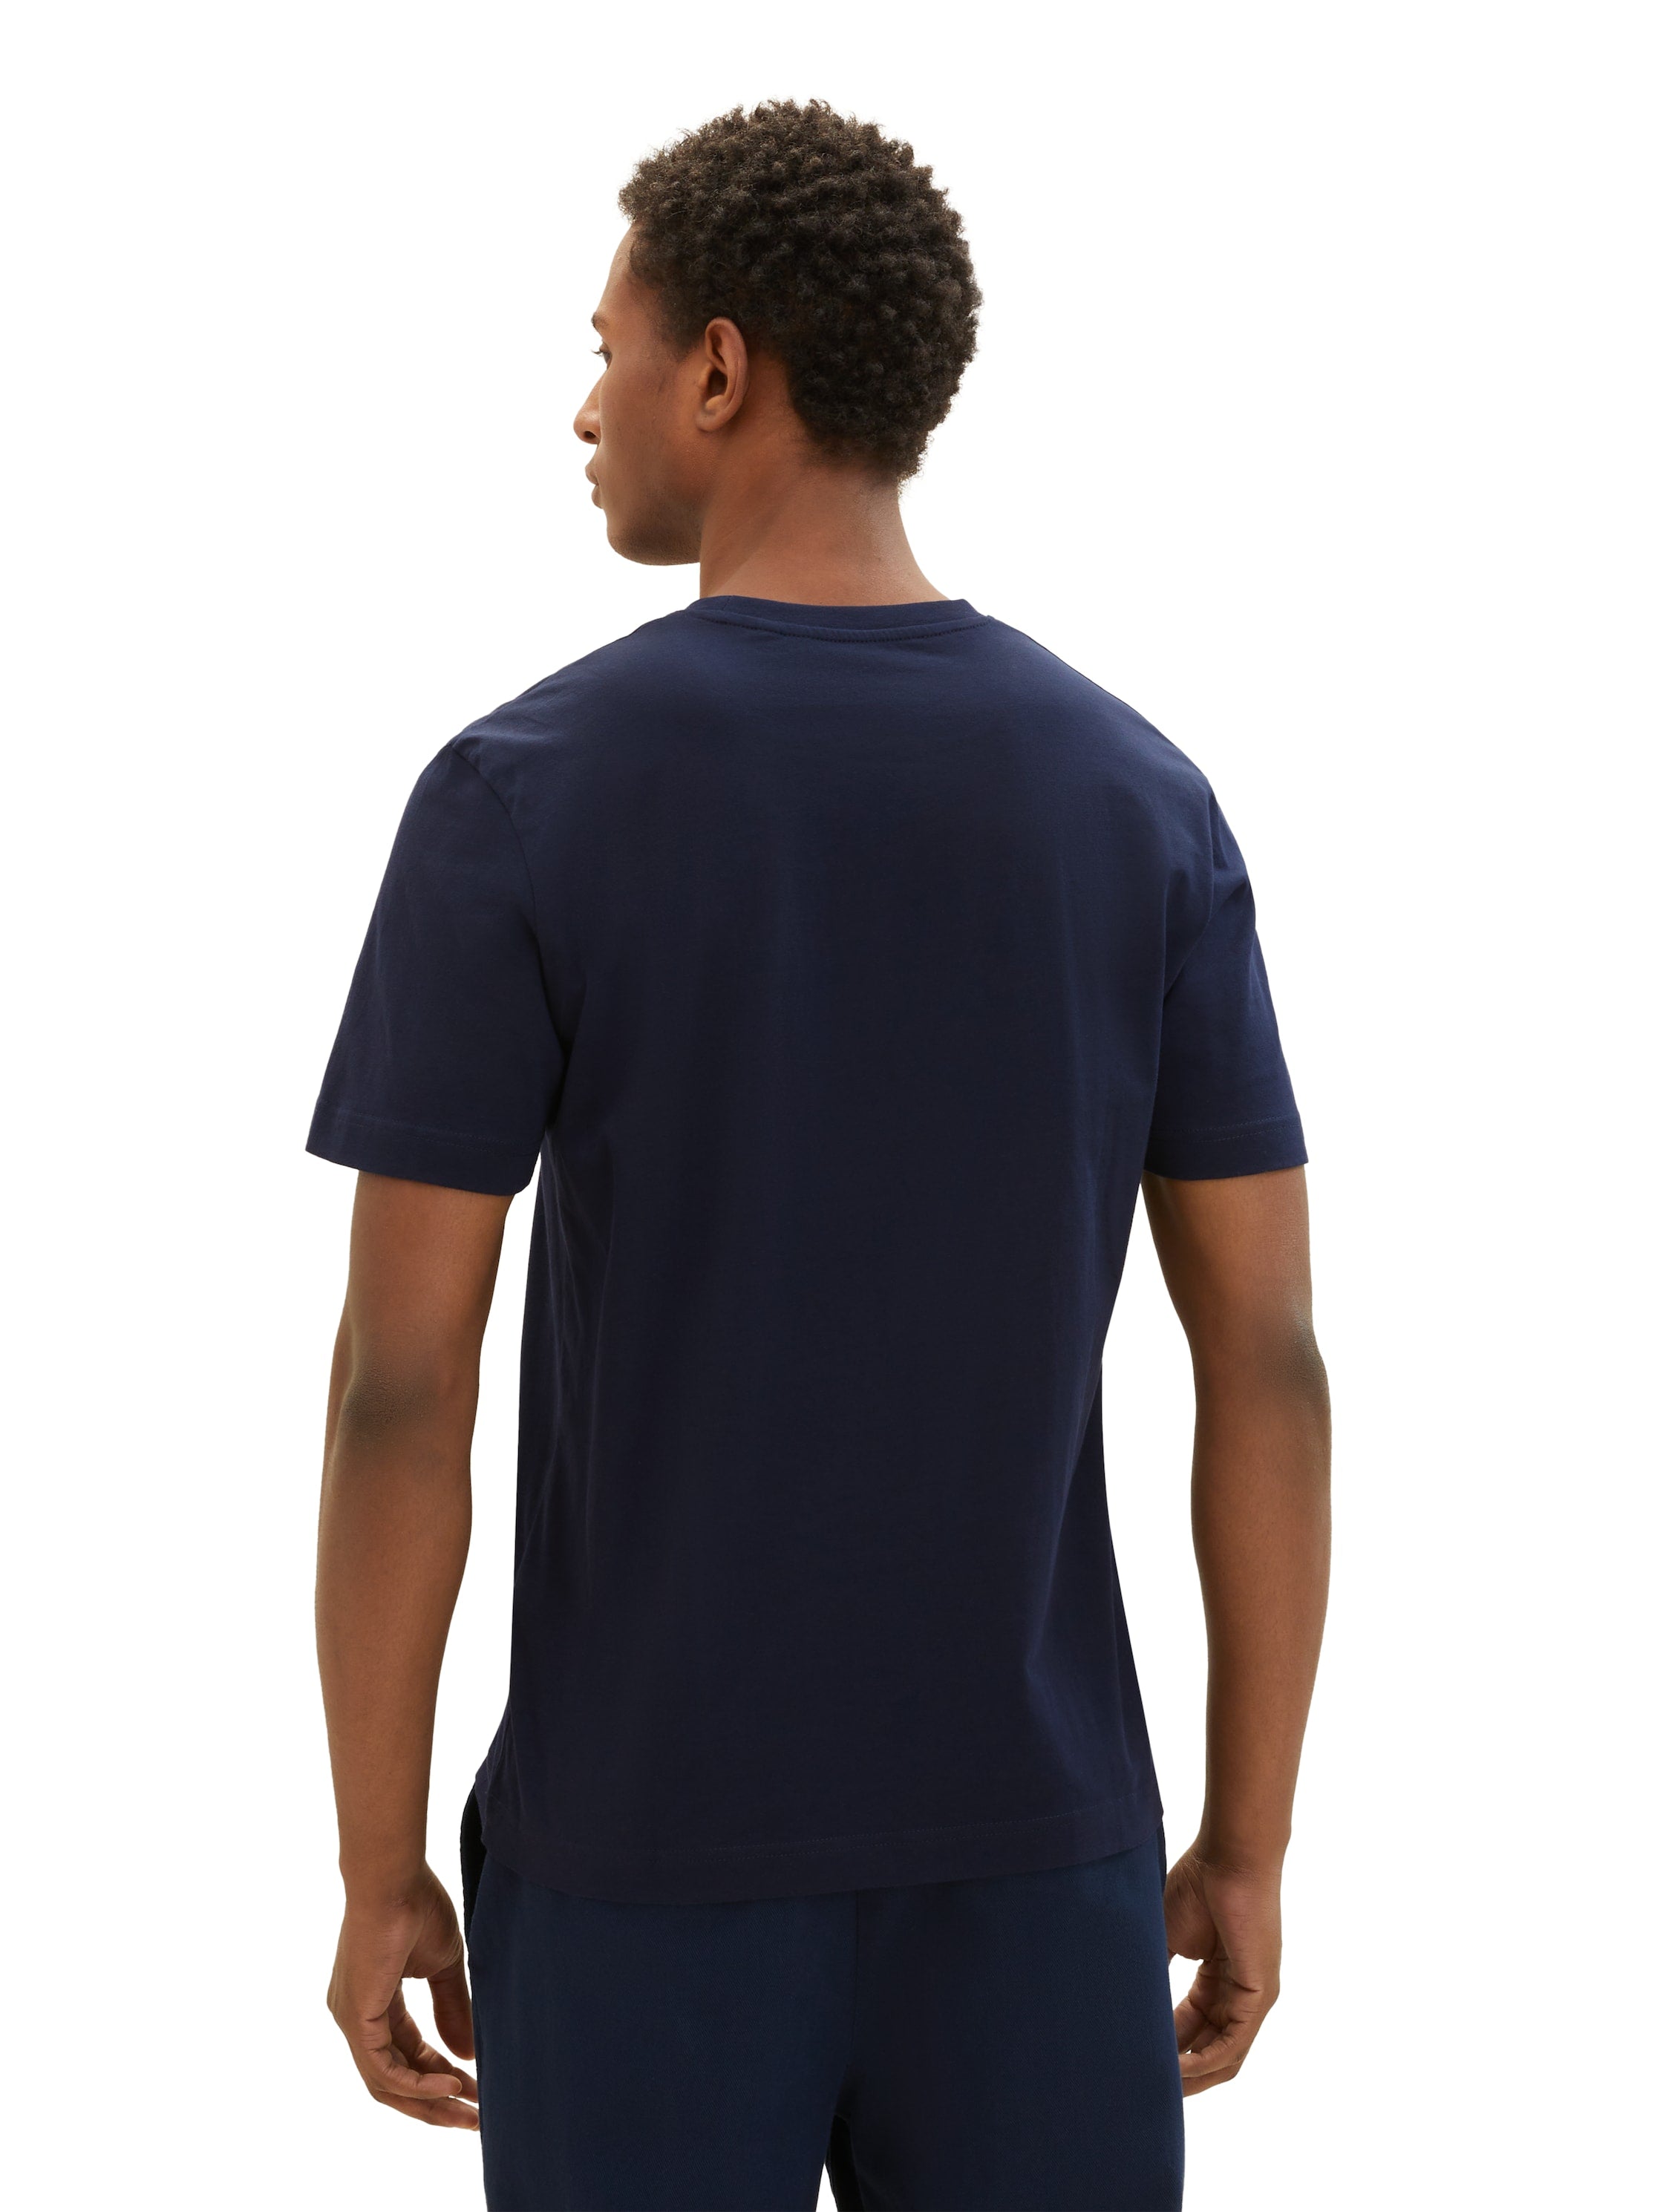 Tom Tailor Navy T-Shirt with a Print